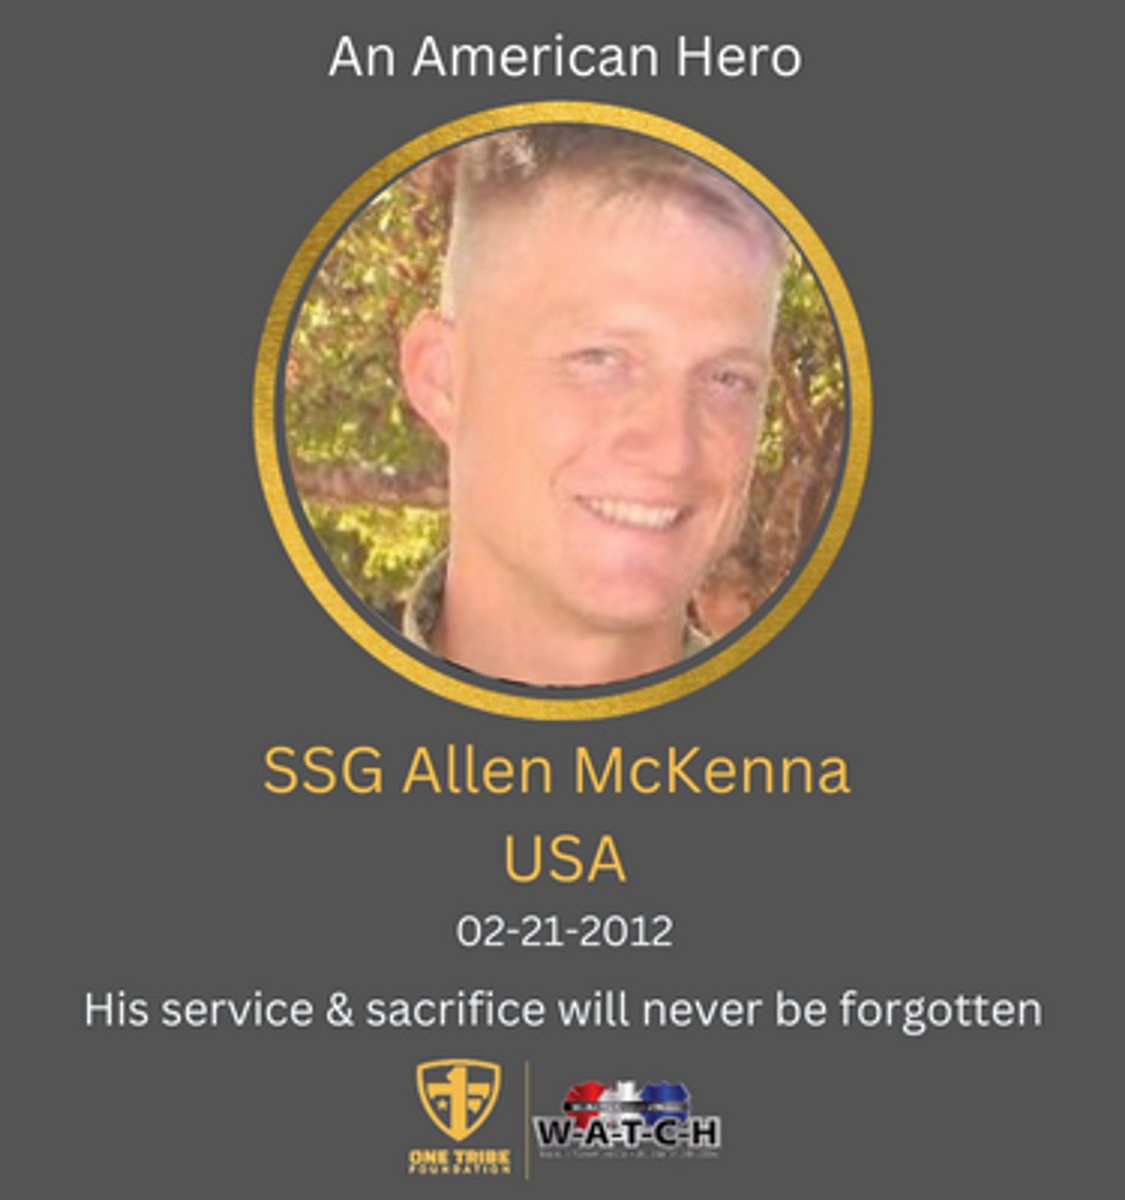 On February 21, 2012, America lost a hero:

𝗦𝗦𝗚 𝗔𝗹𝗹𝗲𝗻 𝗠𝗰𝗞𝗲𝗻𝗻𝗮, 𝗨𝗦𝗔

Pause to speak his name out loud and keep the memory of his life of service alive. Remember his face and never forget his children and family who are living each day without their hero
#OneTr1be